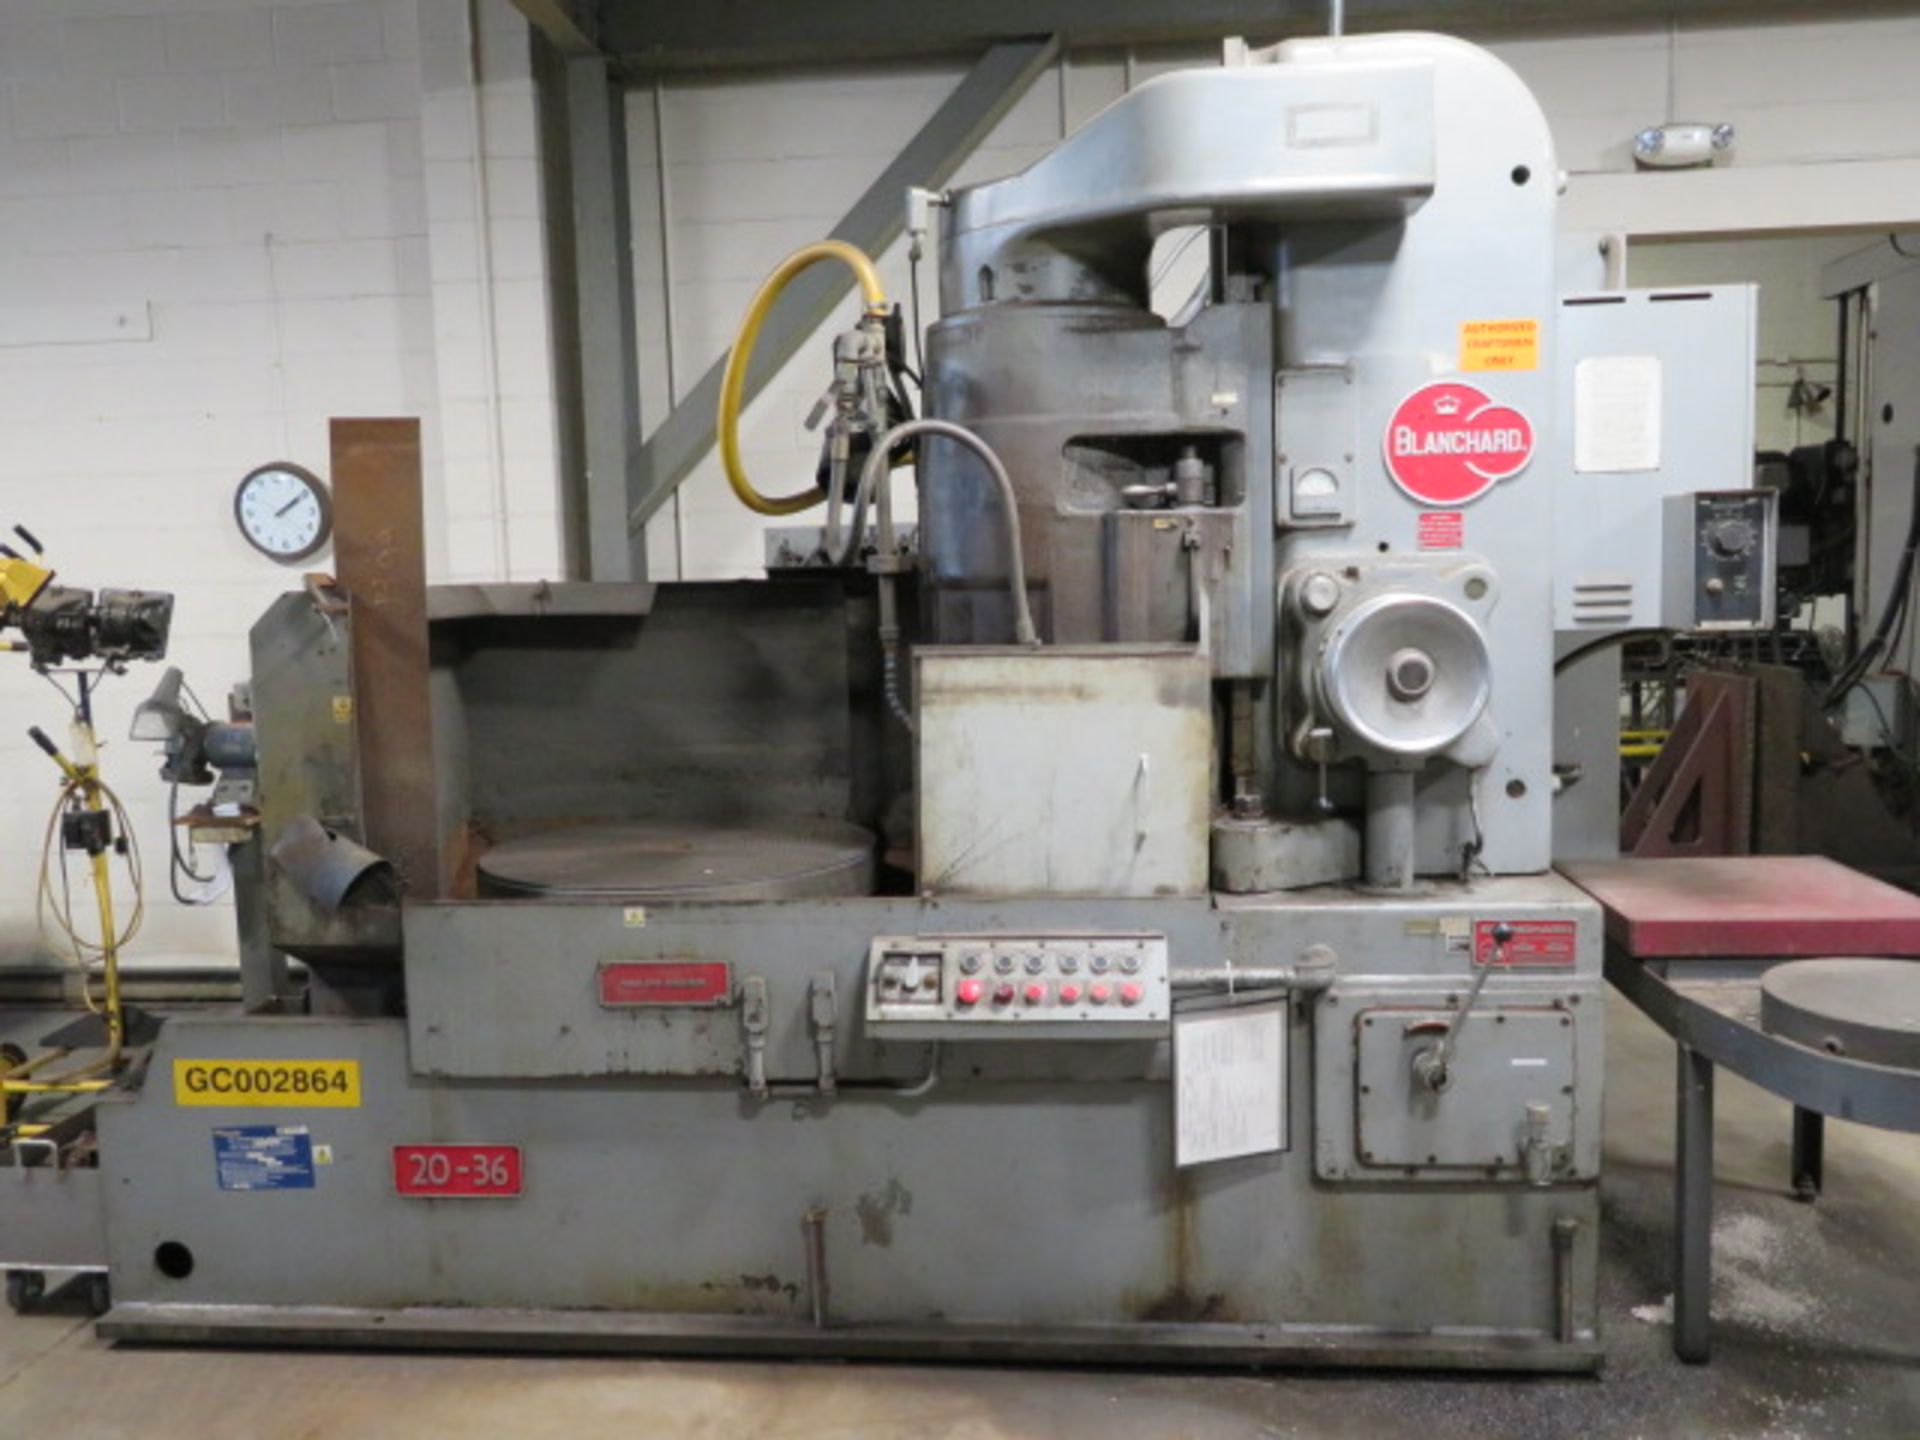 1980 BLANCHARD 20-36 Rotary Surface Grinder, S/N 20-15-239, 22KW (30HP), 5/16” Chuck, Electro-Mag - Image 3 of 3